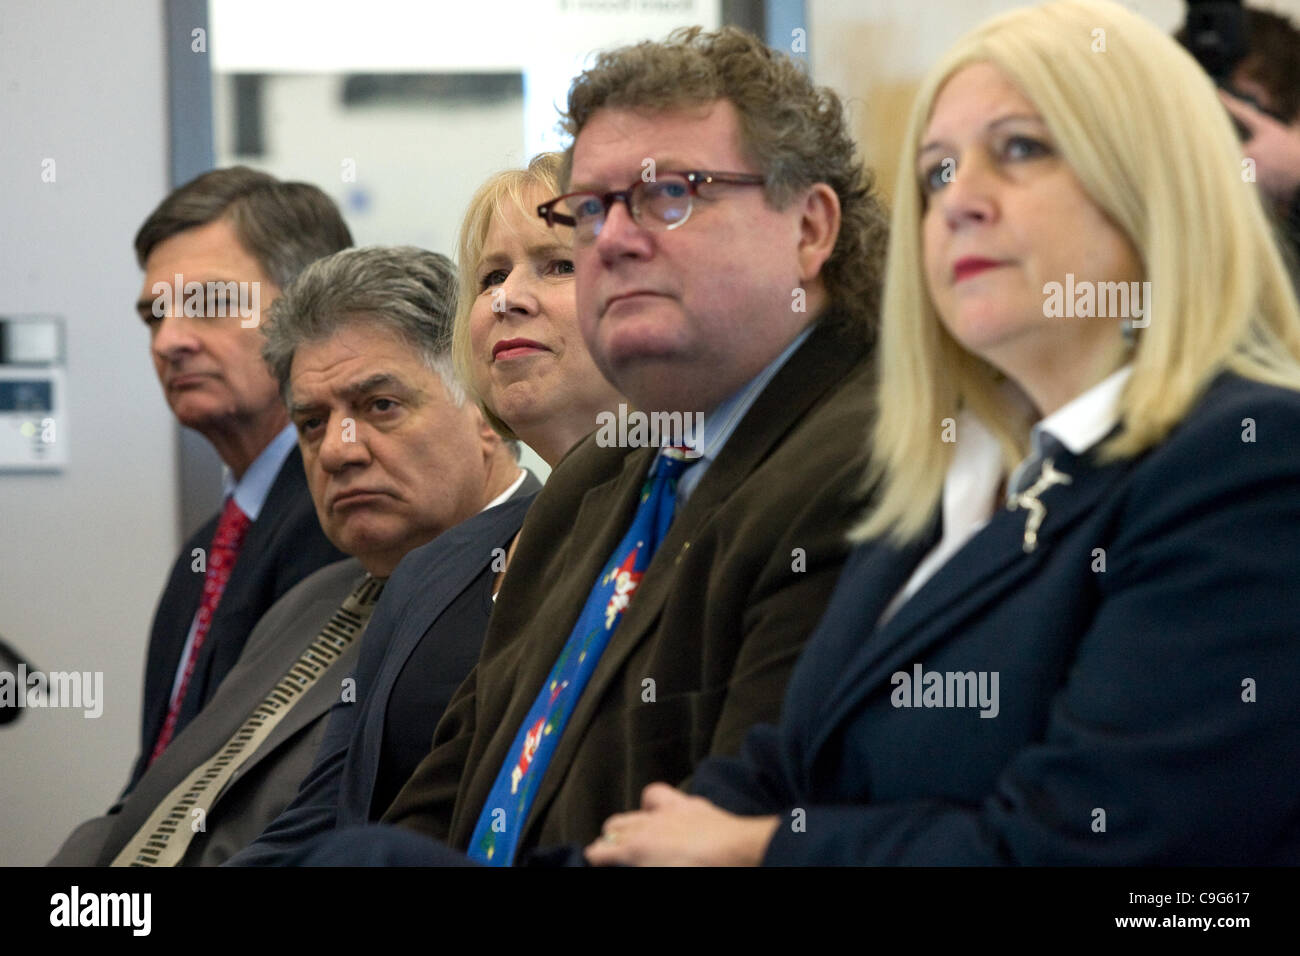 London Ontario, Canada - December 20, 2011. From left to right Chris Bentley, MPP - Minister of the Environment, Joe Fontana, Mayor of London Ontario, Deb Matthews, MPP - Minister of Health and Long Term Care, Ed Holder, MP - London West and Susan Truppe MP - London North Centre listen to a presenta Stock Photo